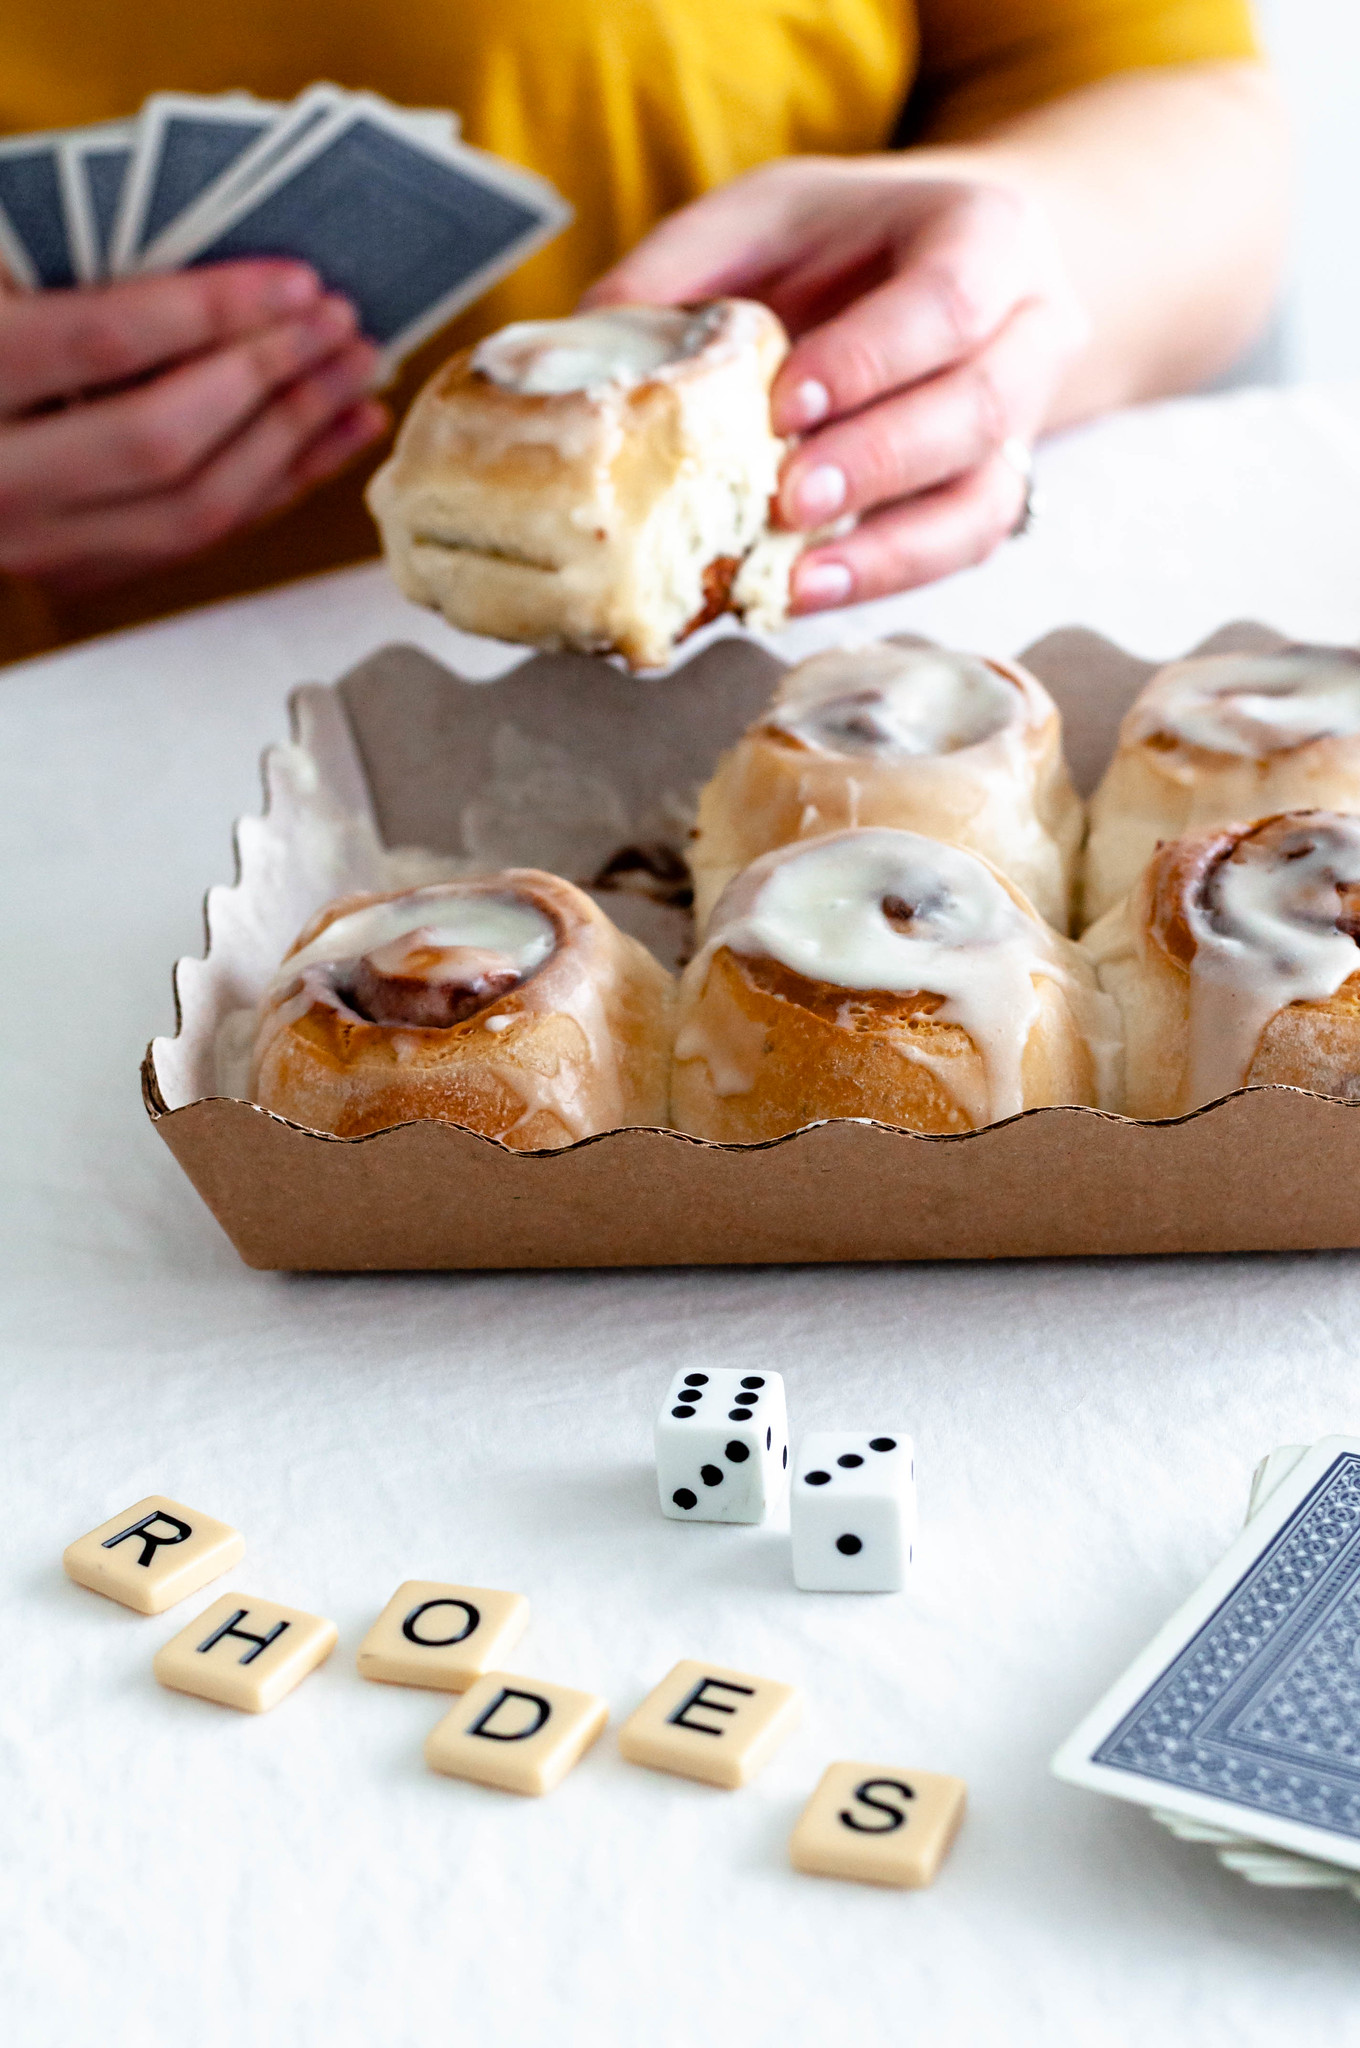 Rhodes Bake-N-Serve Anytime!® Cinnamon Rolls aren't just for breakfast. Bake up a box and make it a game night with Rhodes cinnamon rolls and chili.